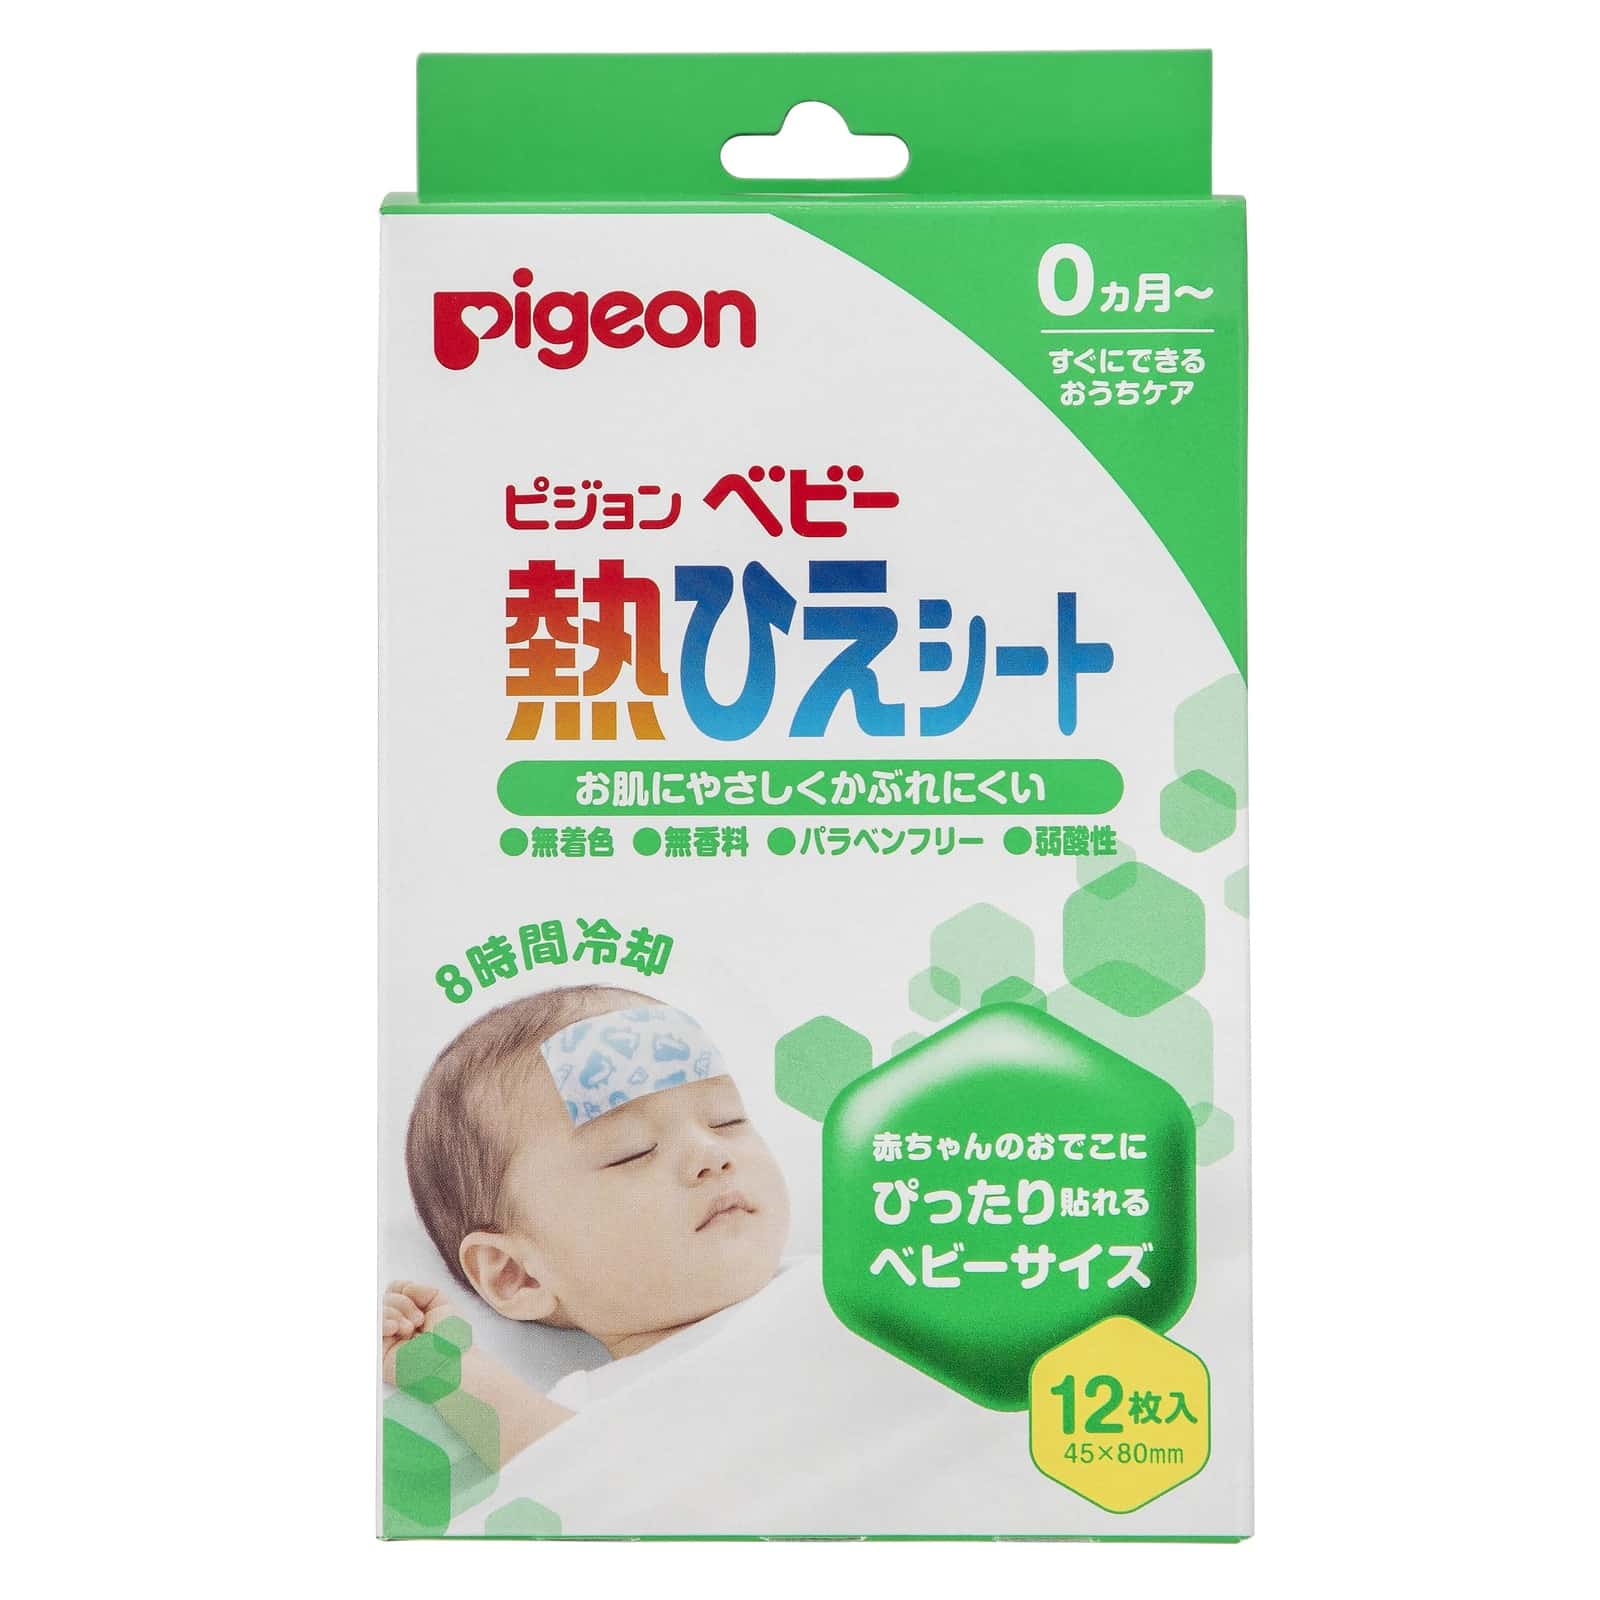 Pigeon Cooling Sheet 1 Pack(12 Sheets) 45x80mm